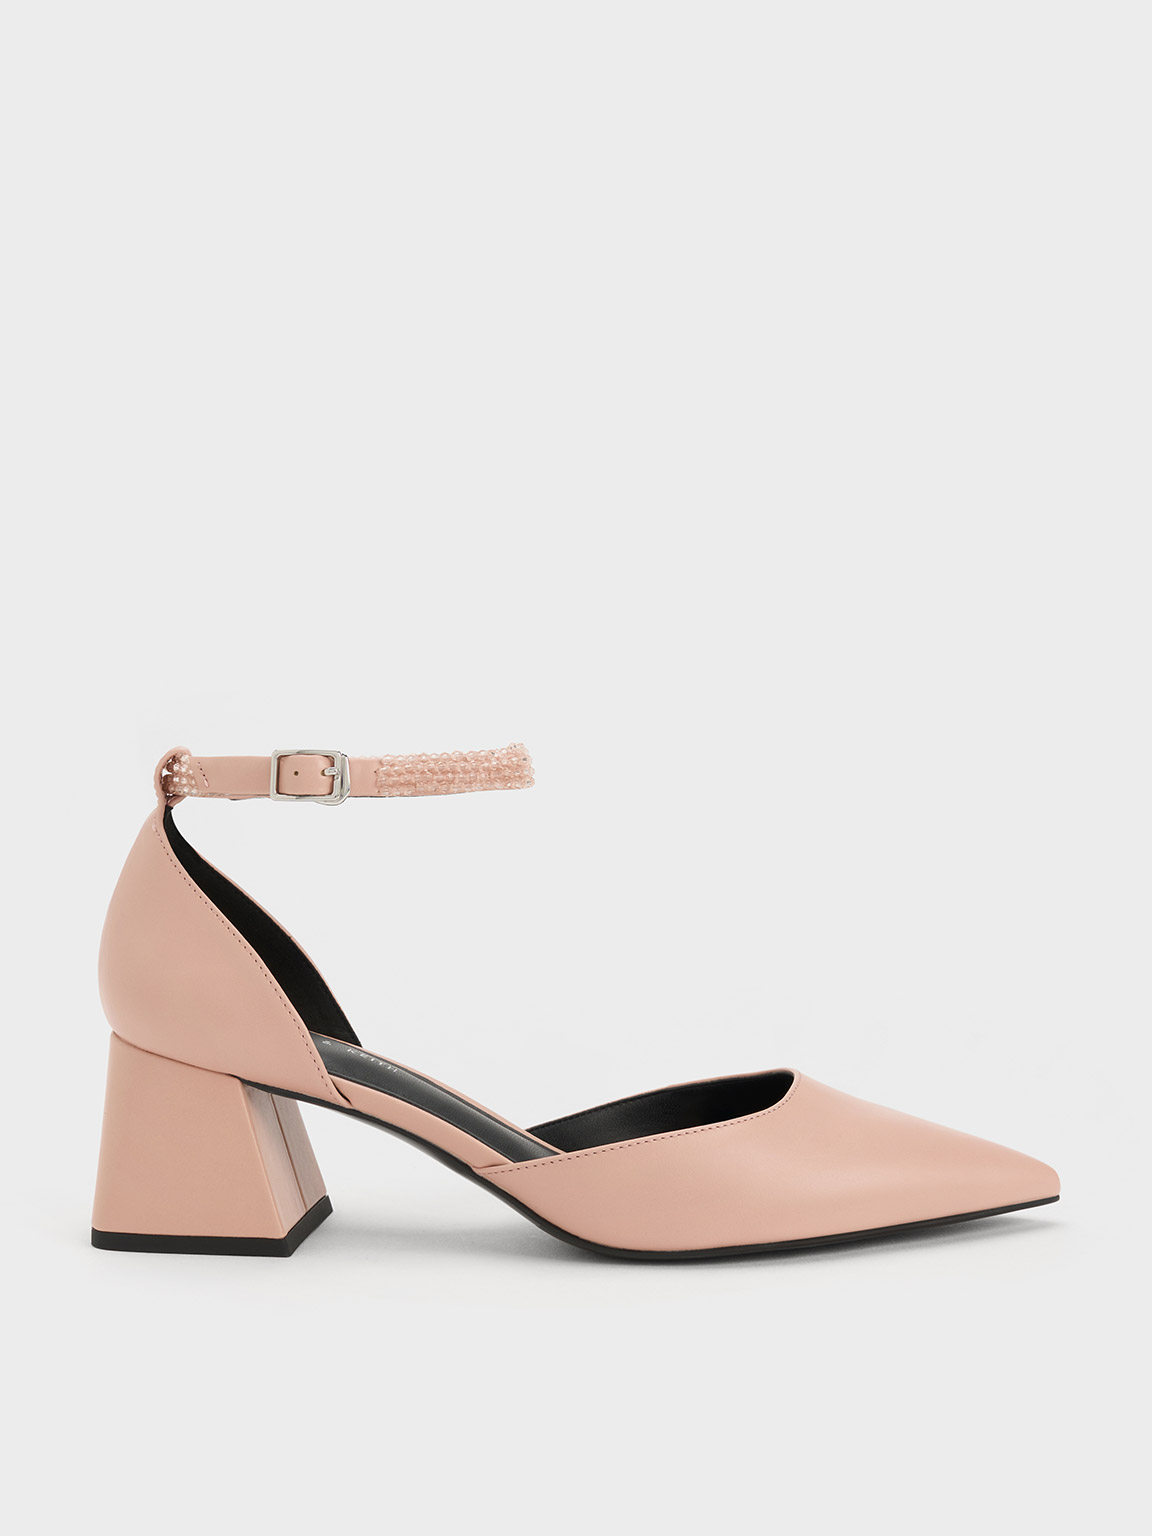 Nude Beaded Ankle-Strap D'Orsay Pumps - CHARLES & KEITH SG